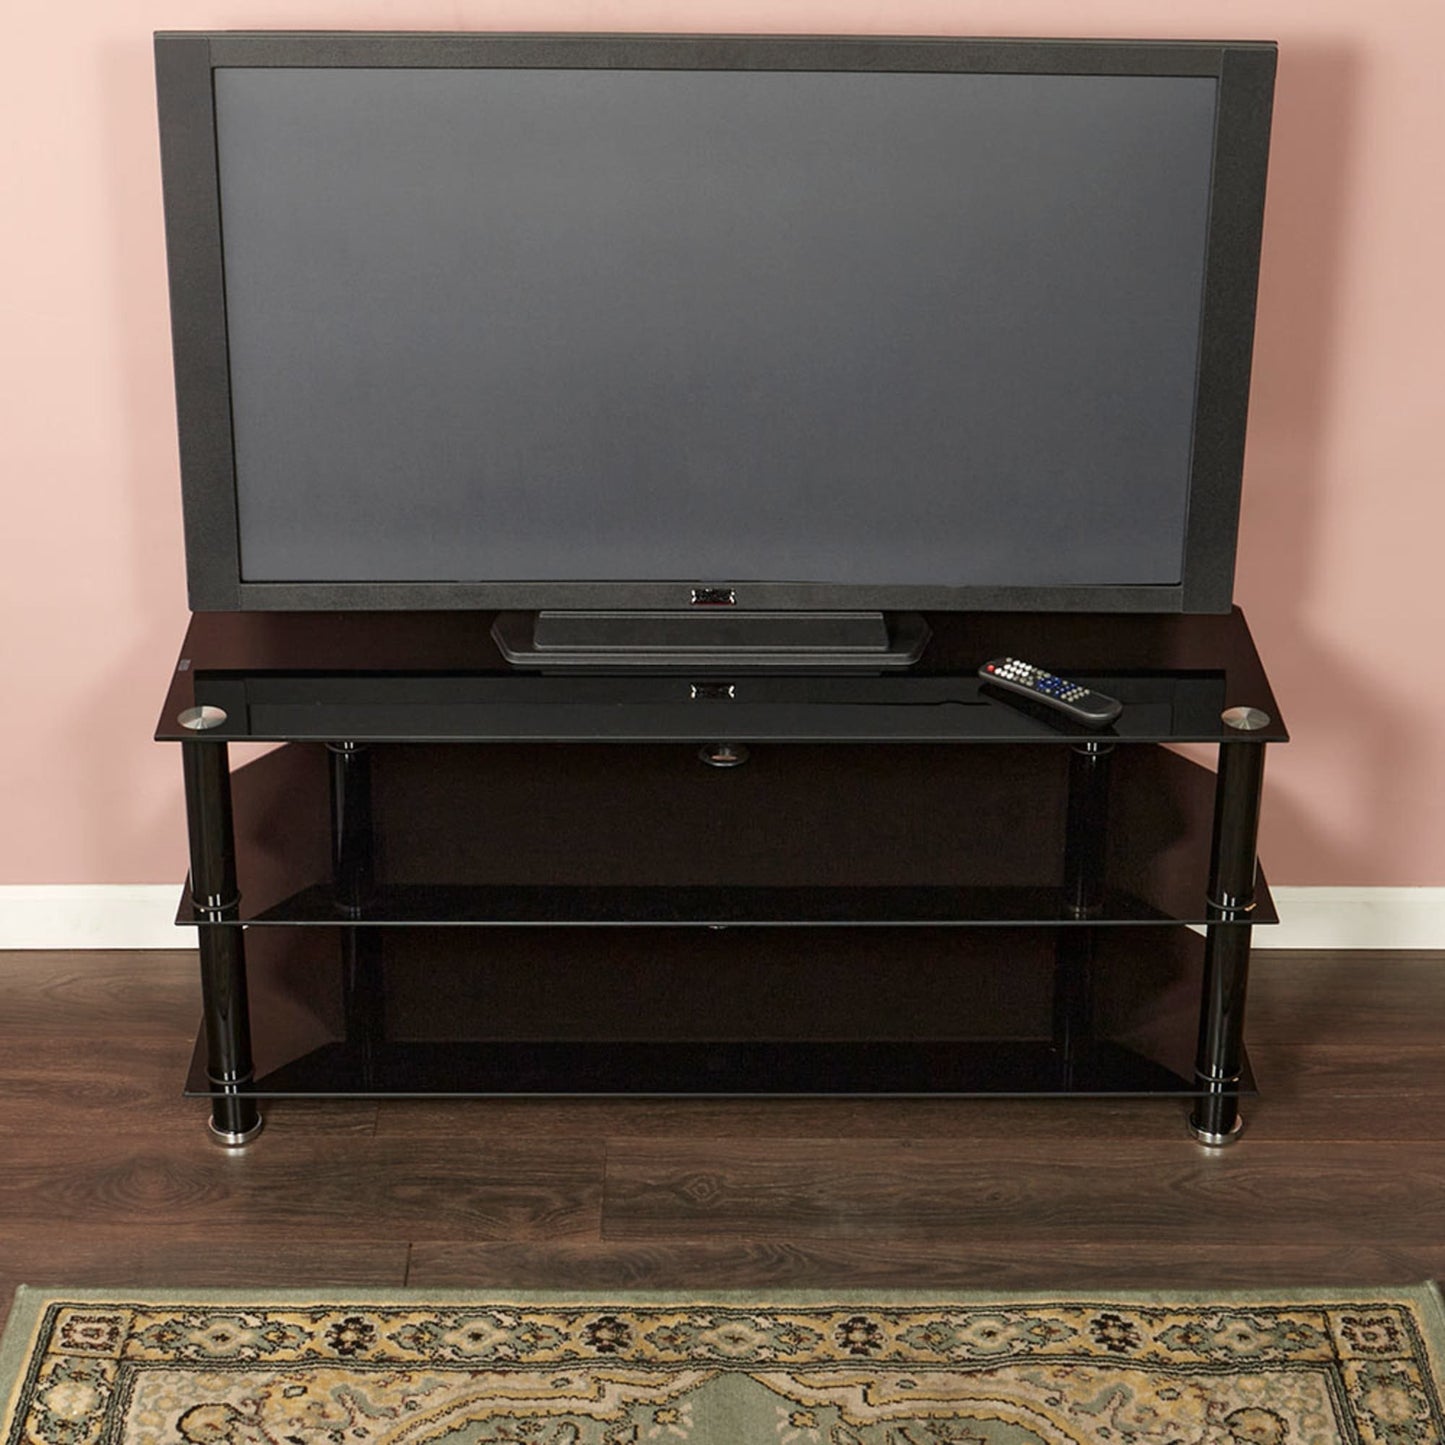 47.2” Brown Tempered Glass Corner TV Stand with Open Shelves